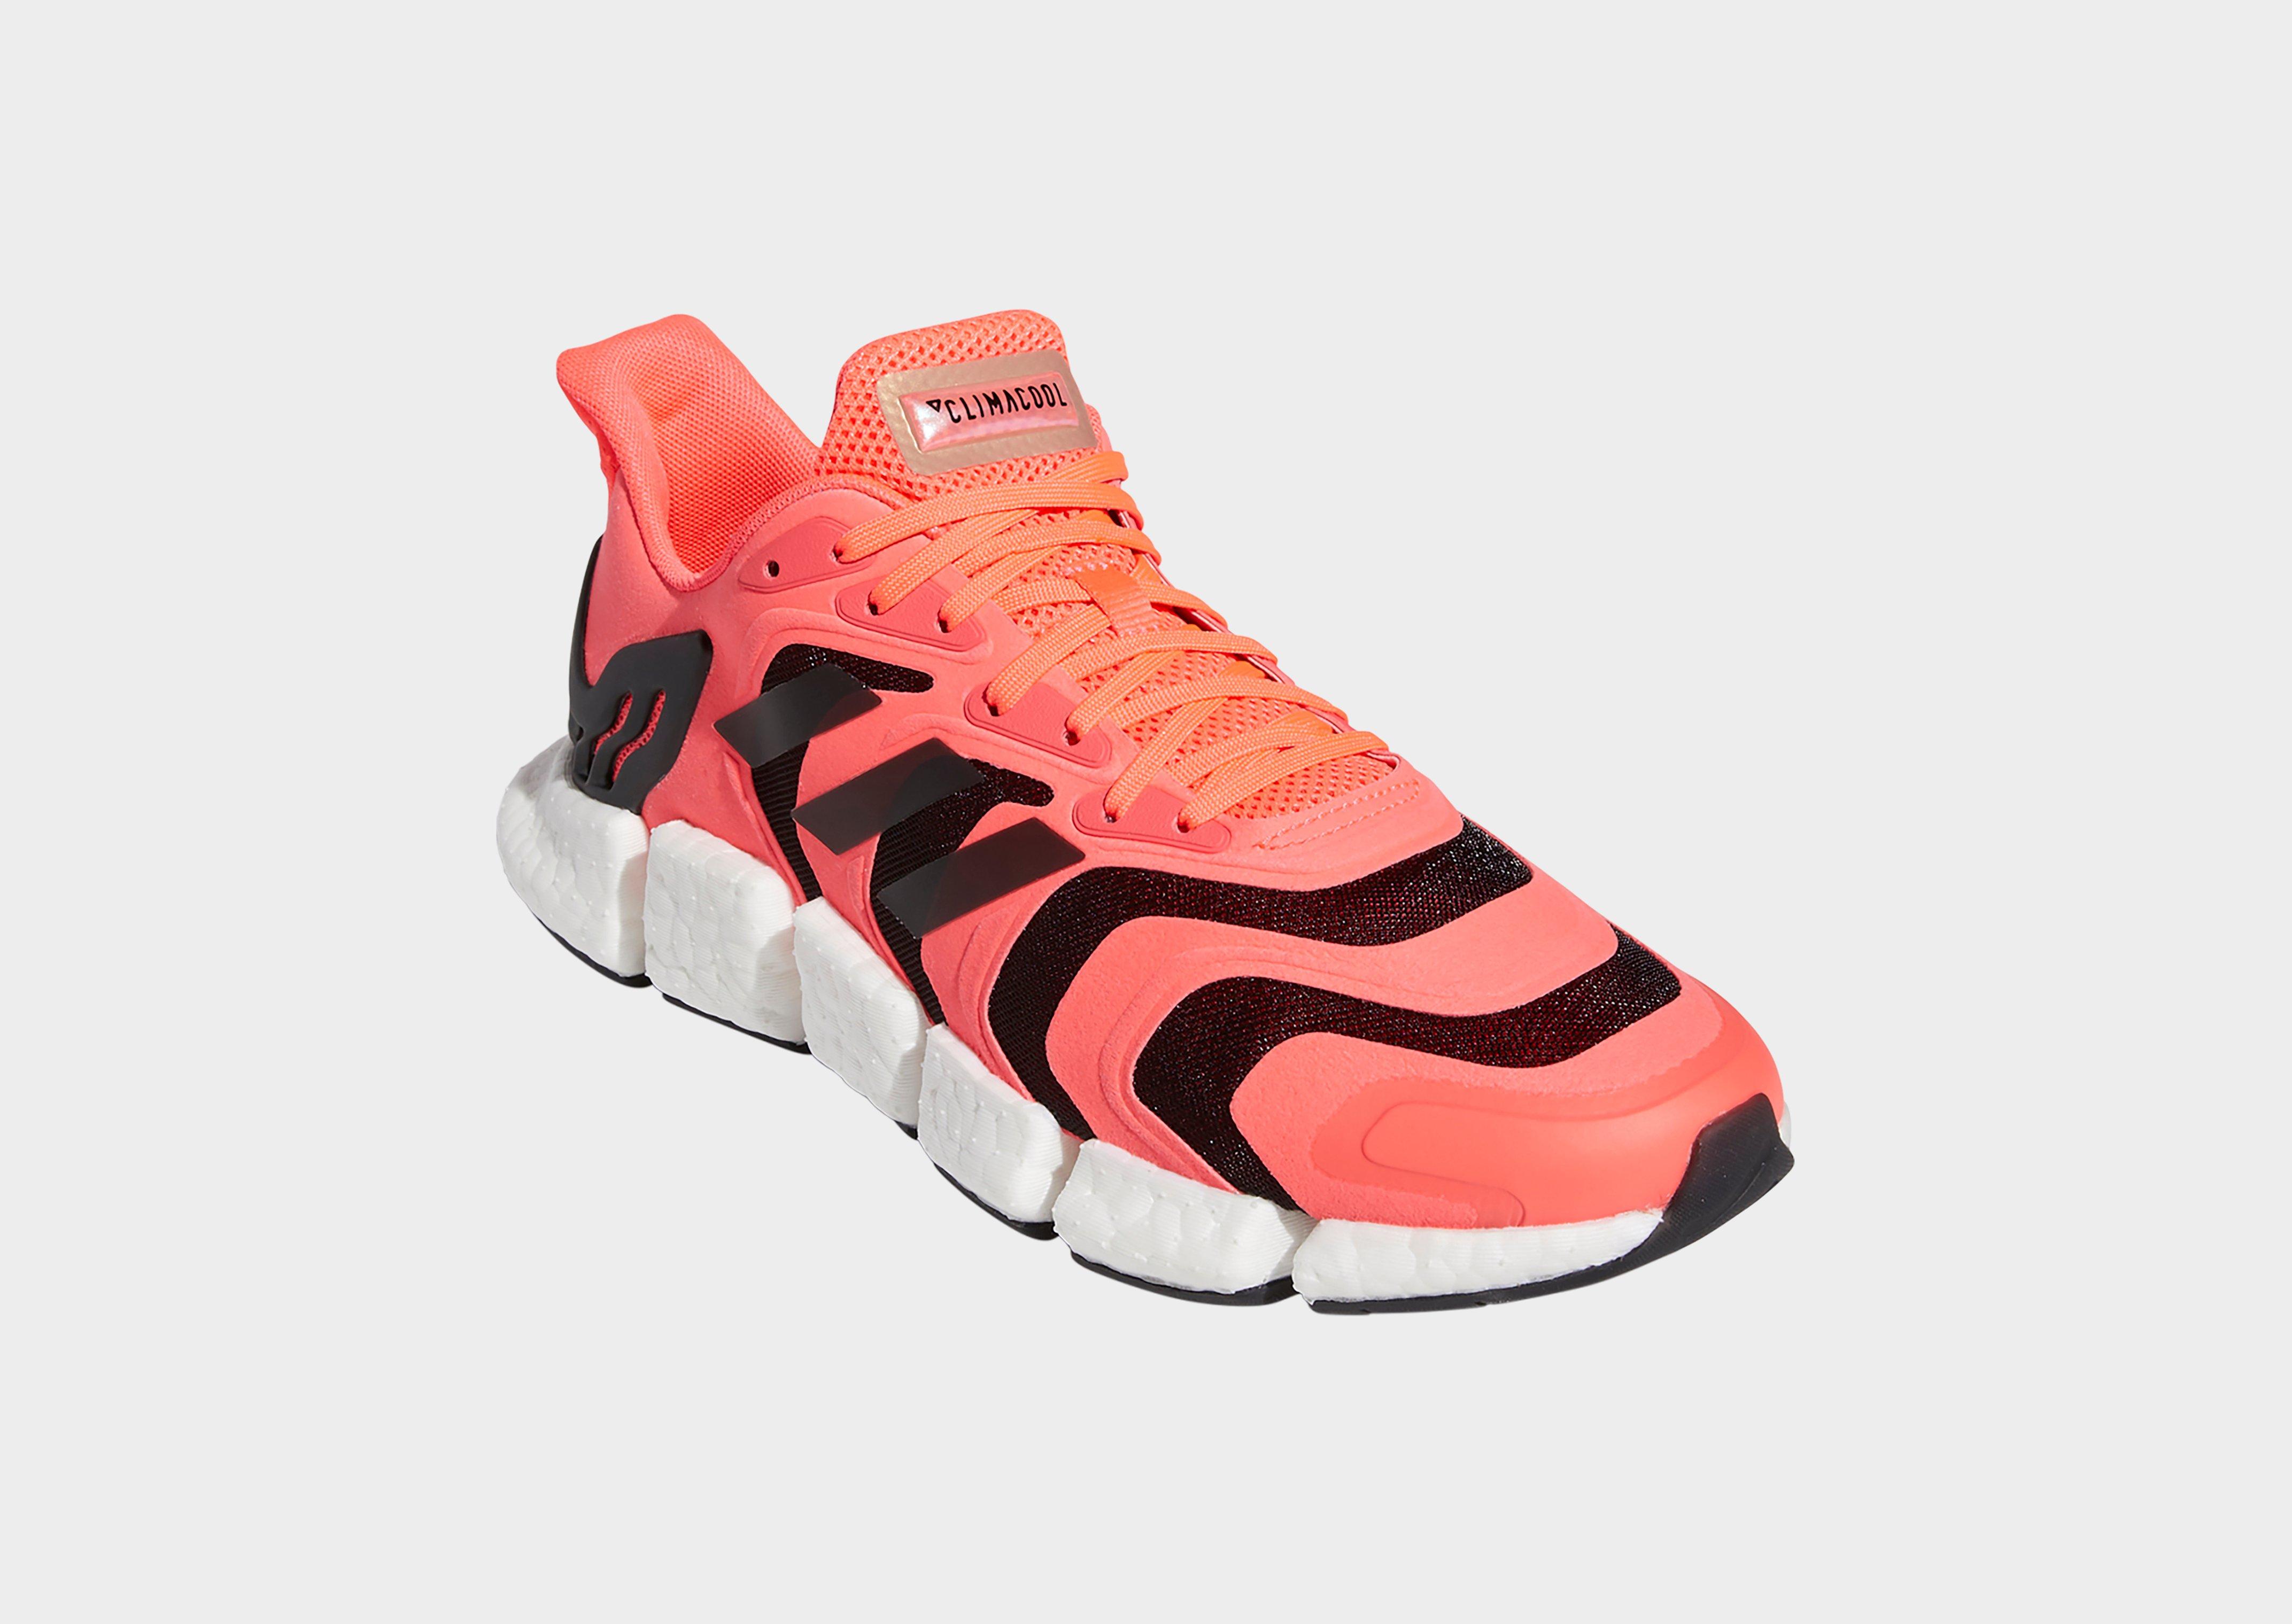 adidas climacool shoes jd